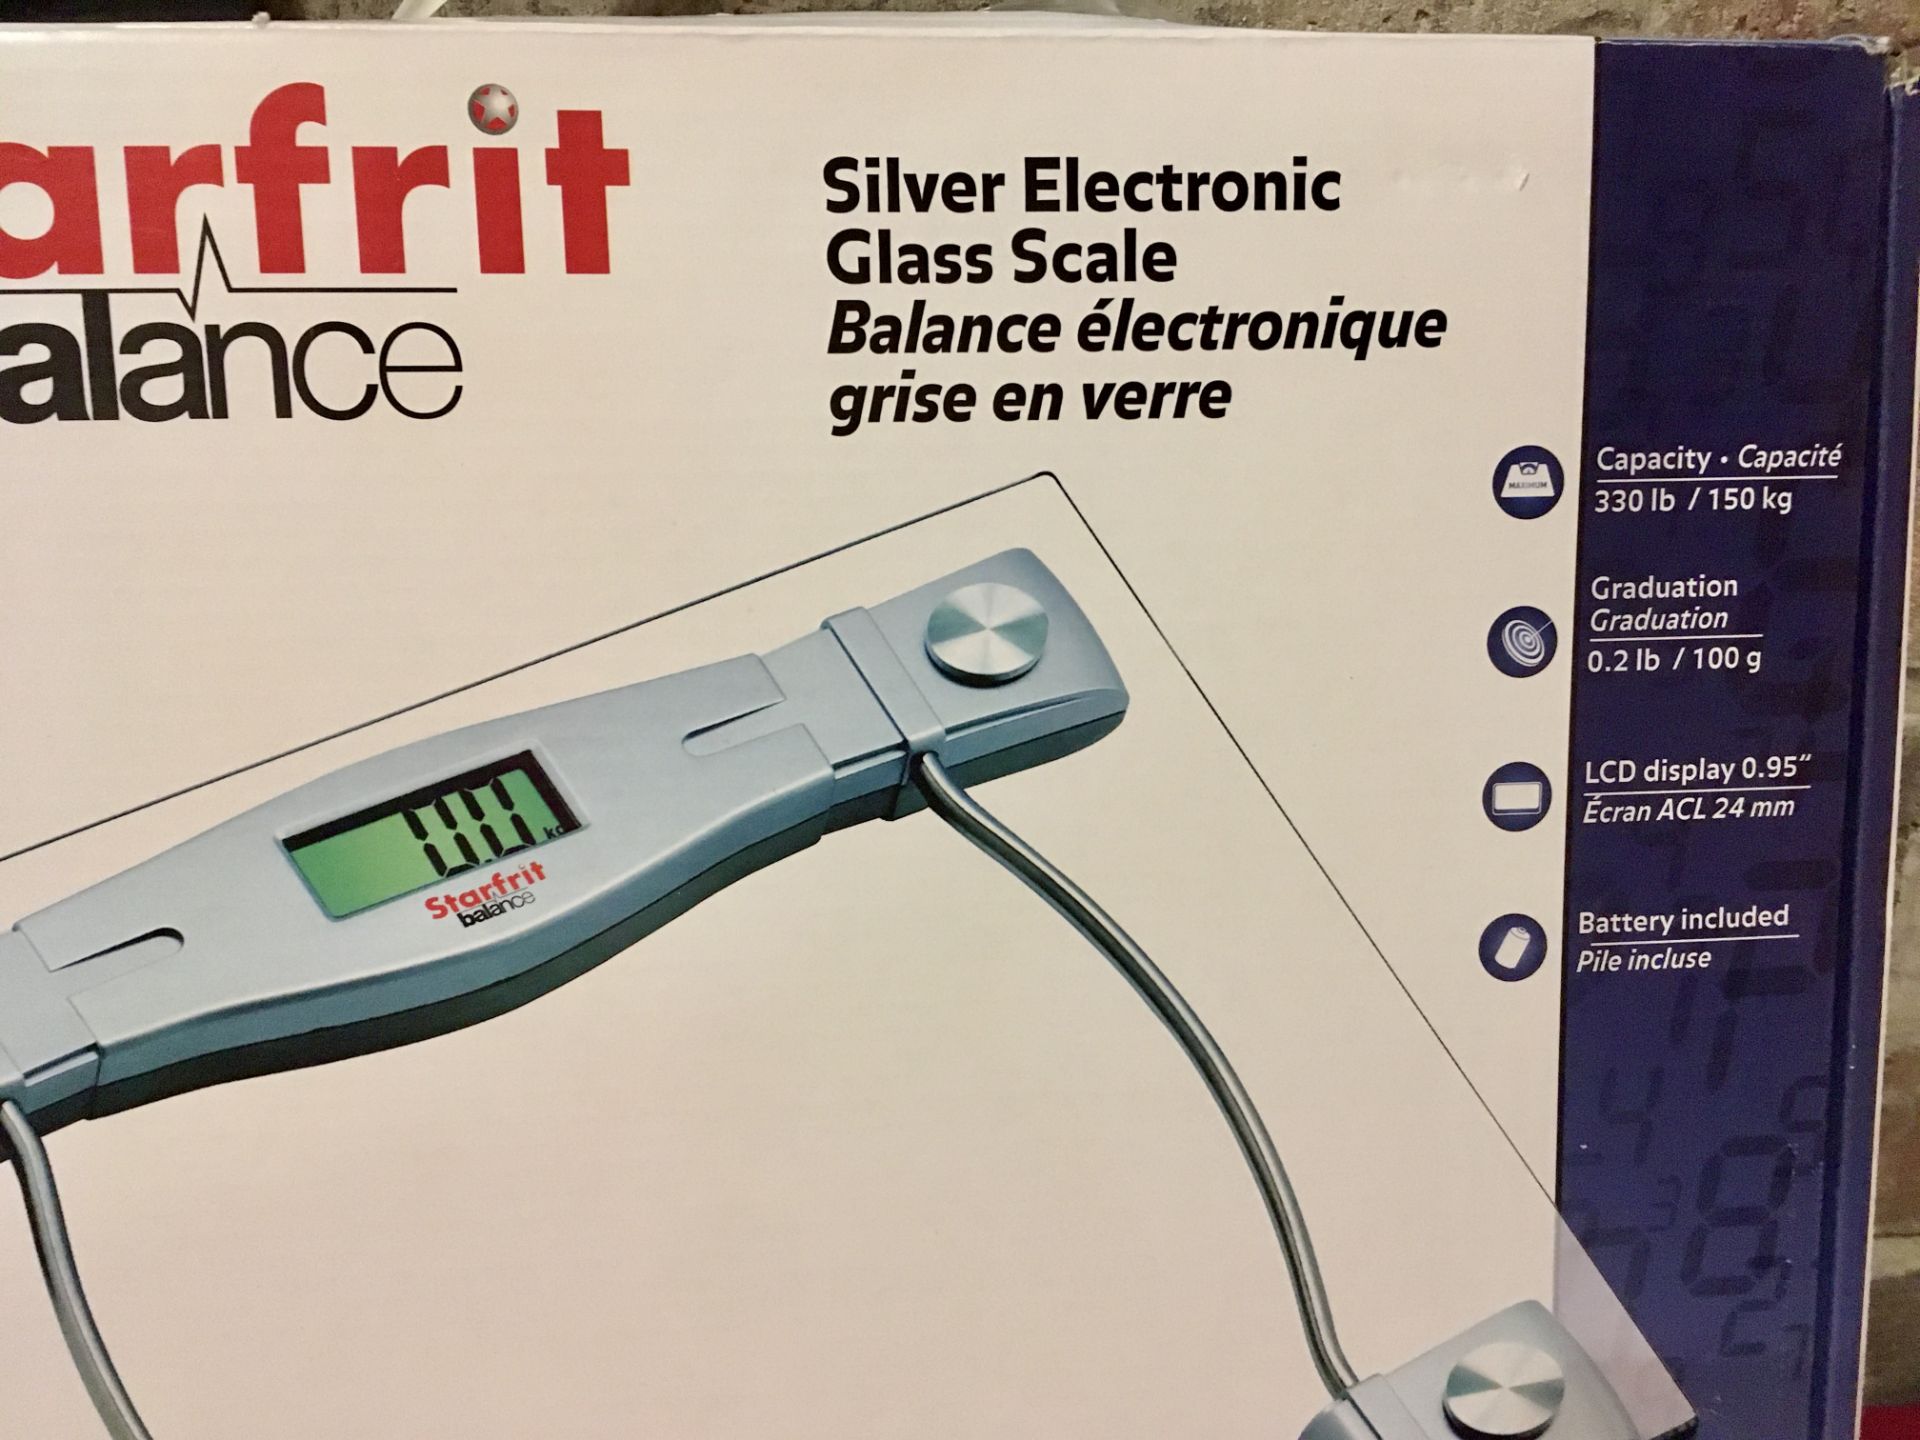 STARFRIT SILVER ELECTRONIC GLASS SCALE - Image 2 of 2